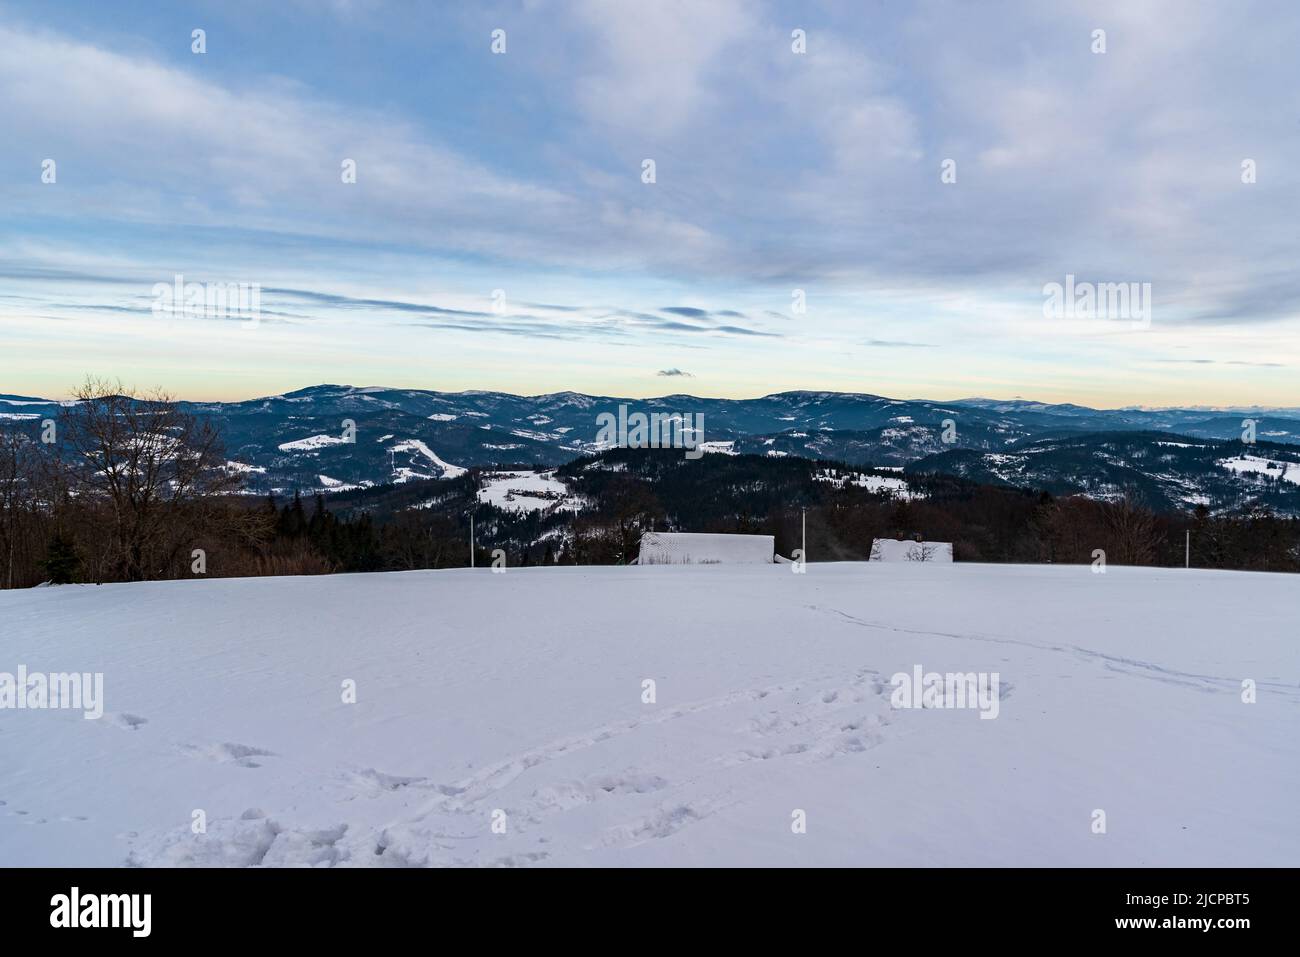 View from Cieslar hill in Beskid Slaski mountains on polish - czech borders during beautiful winter day Stock Photo